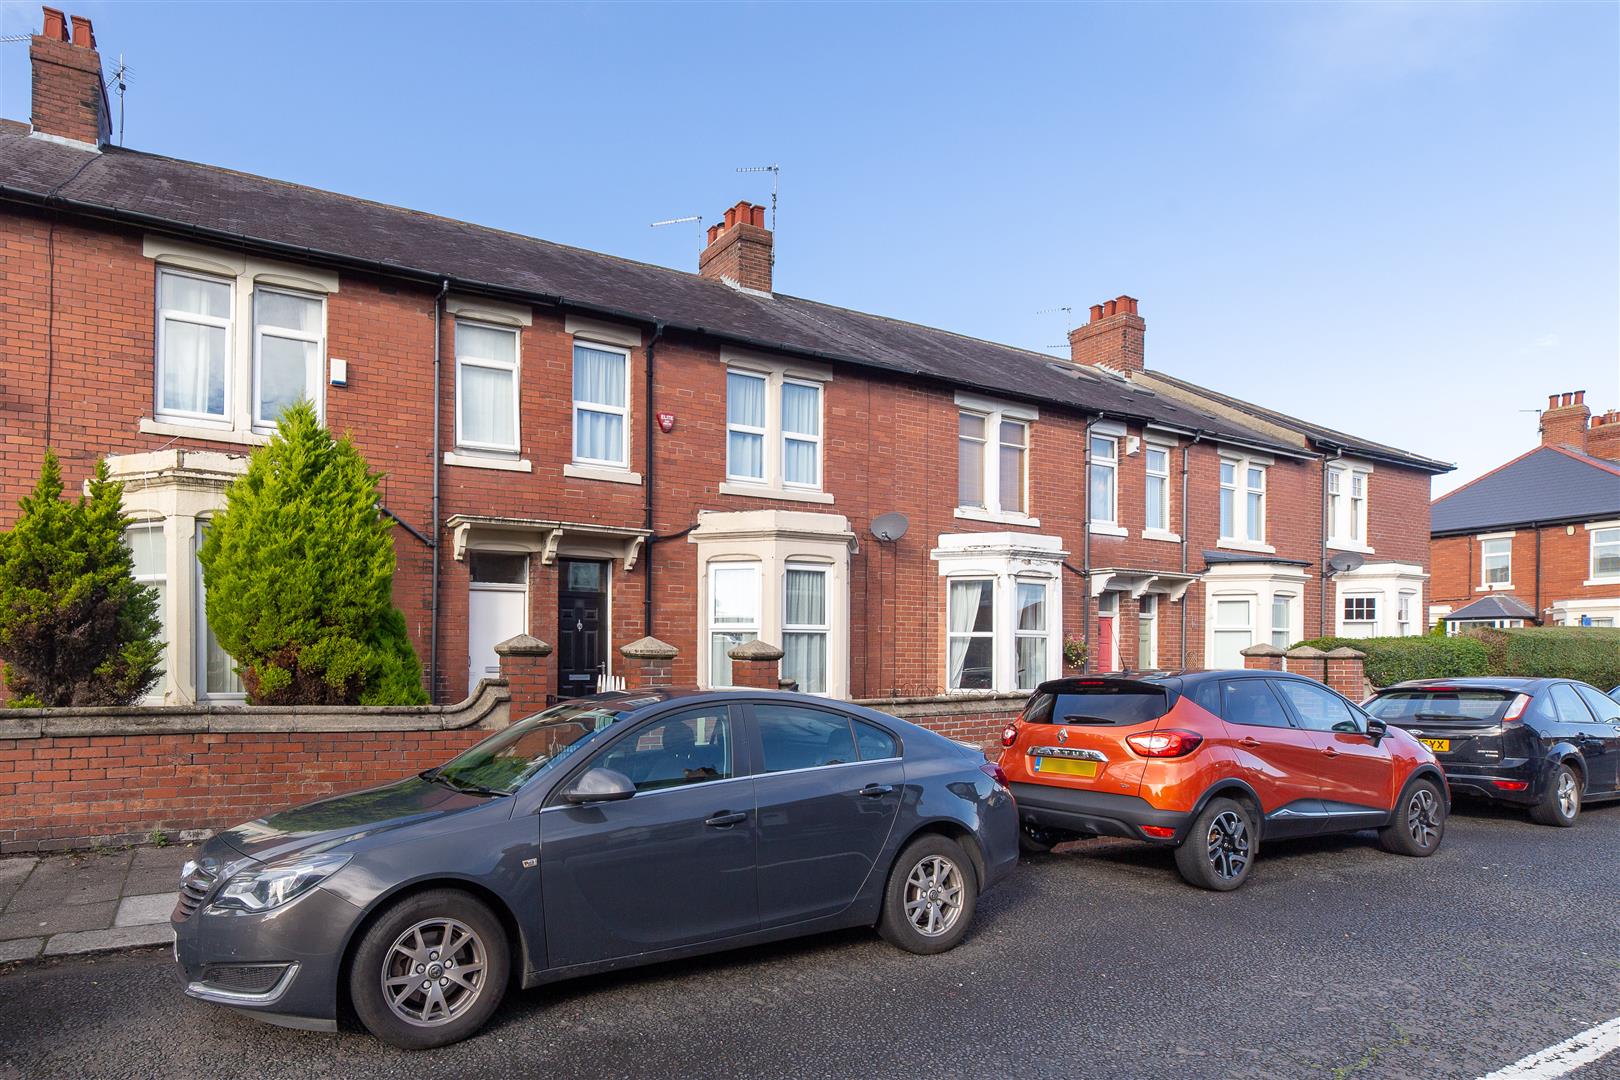 3 bed terraced house for sale in Addycombe Terrace, Heaton - Property Image 1